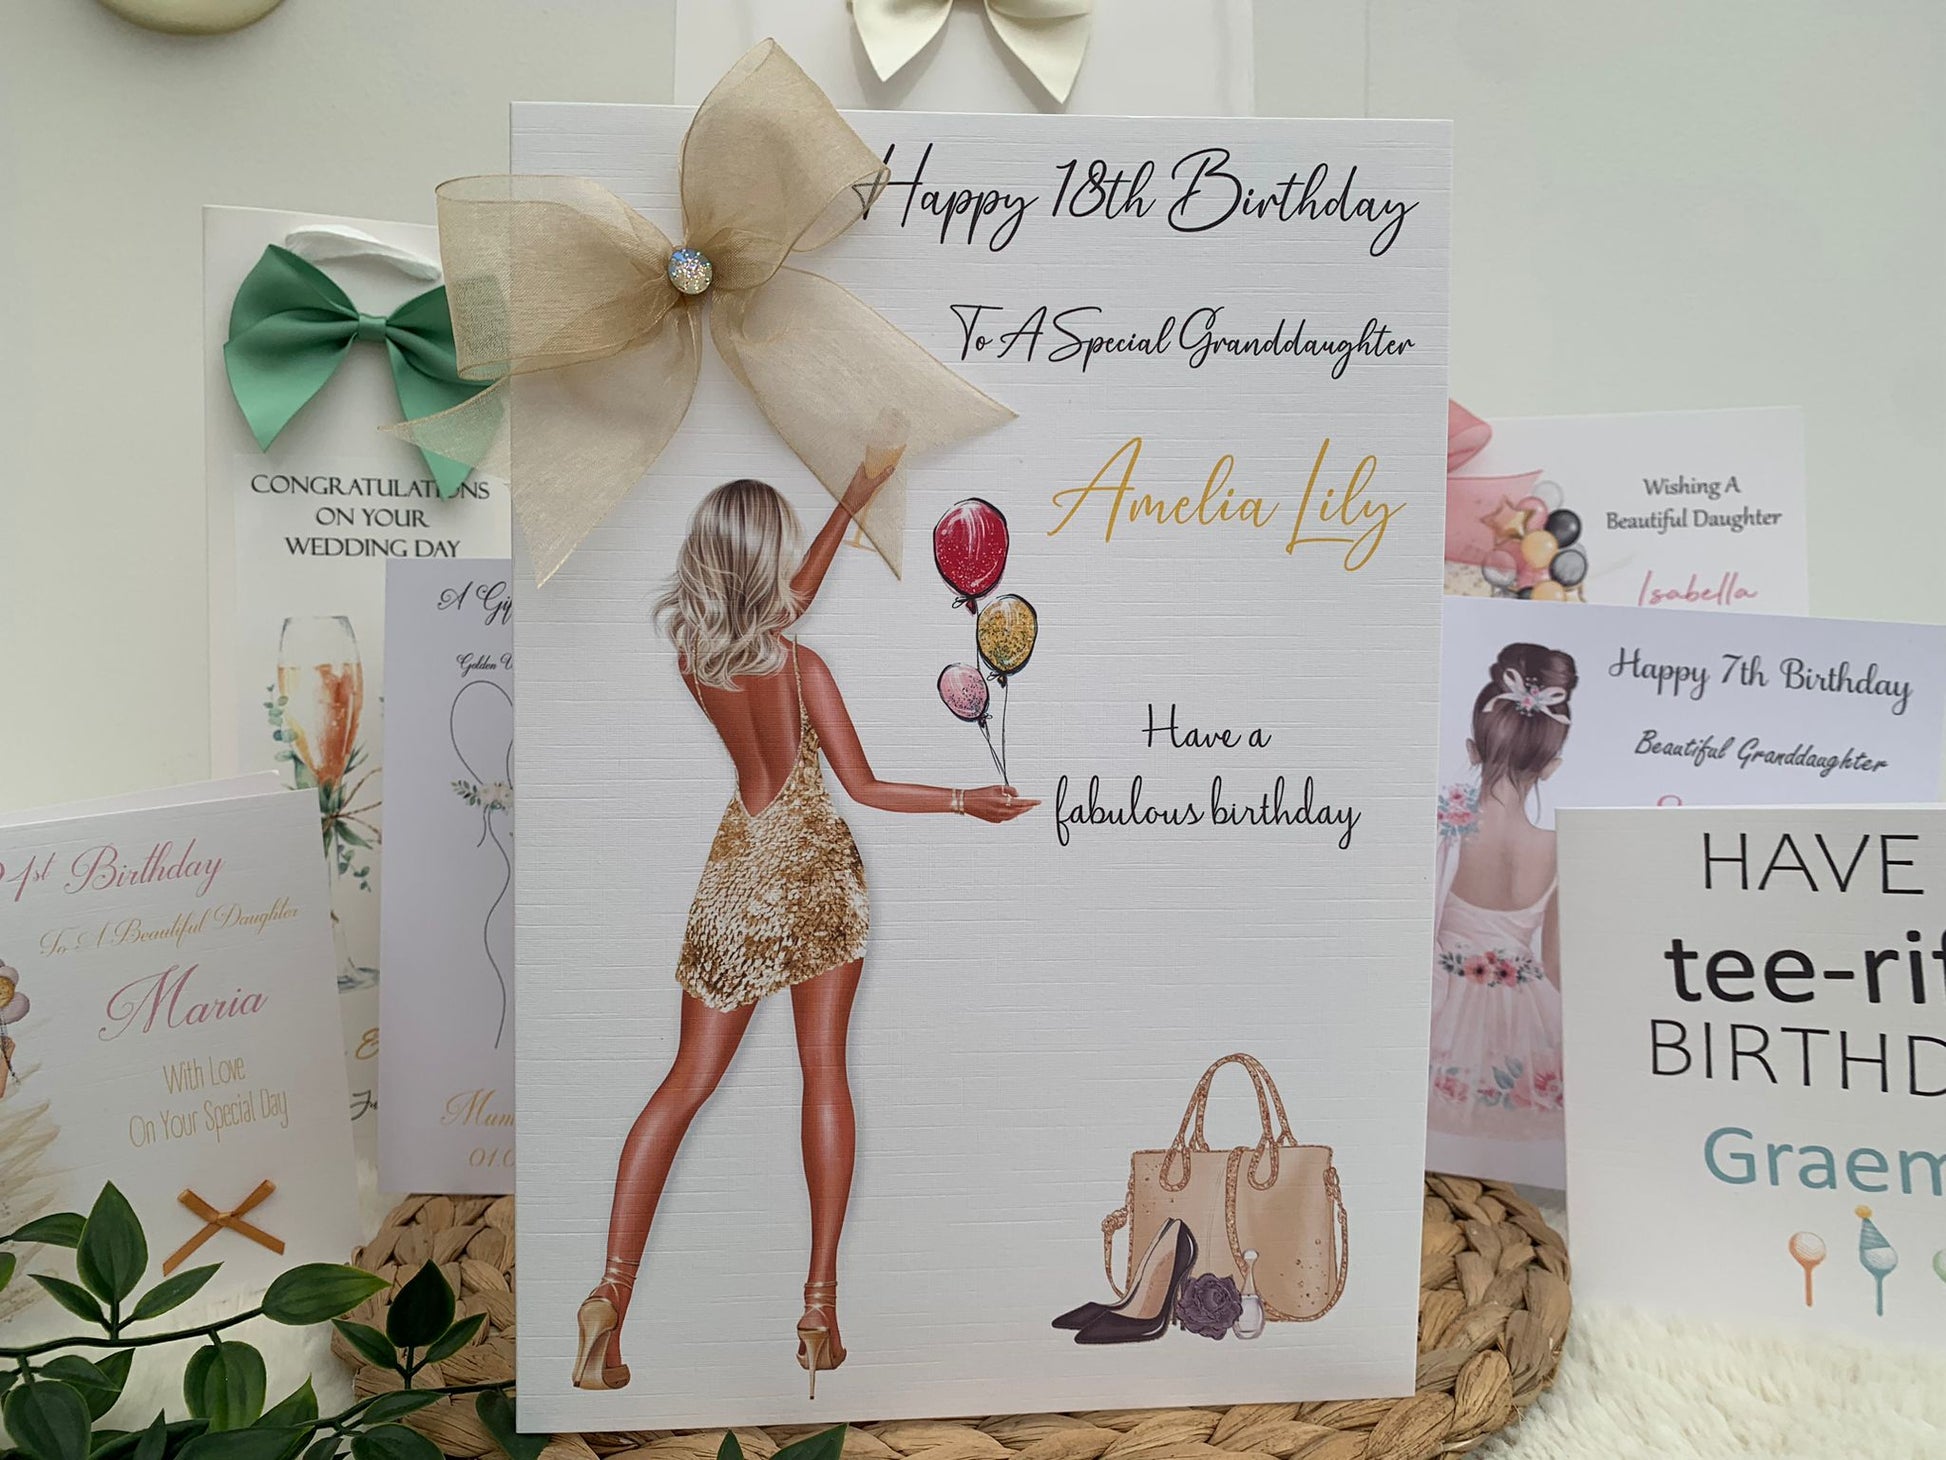 a birthday card with a picture of a woman holding balloons